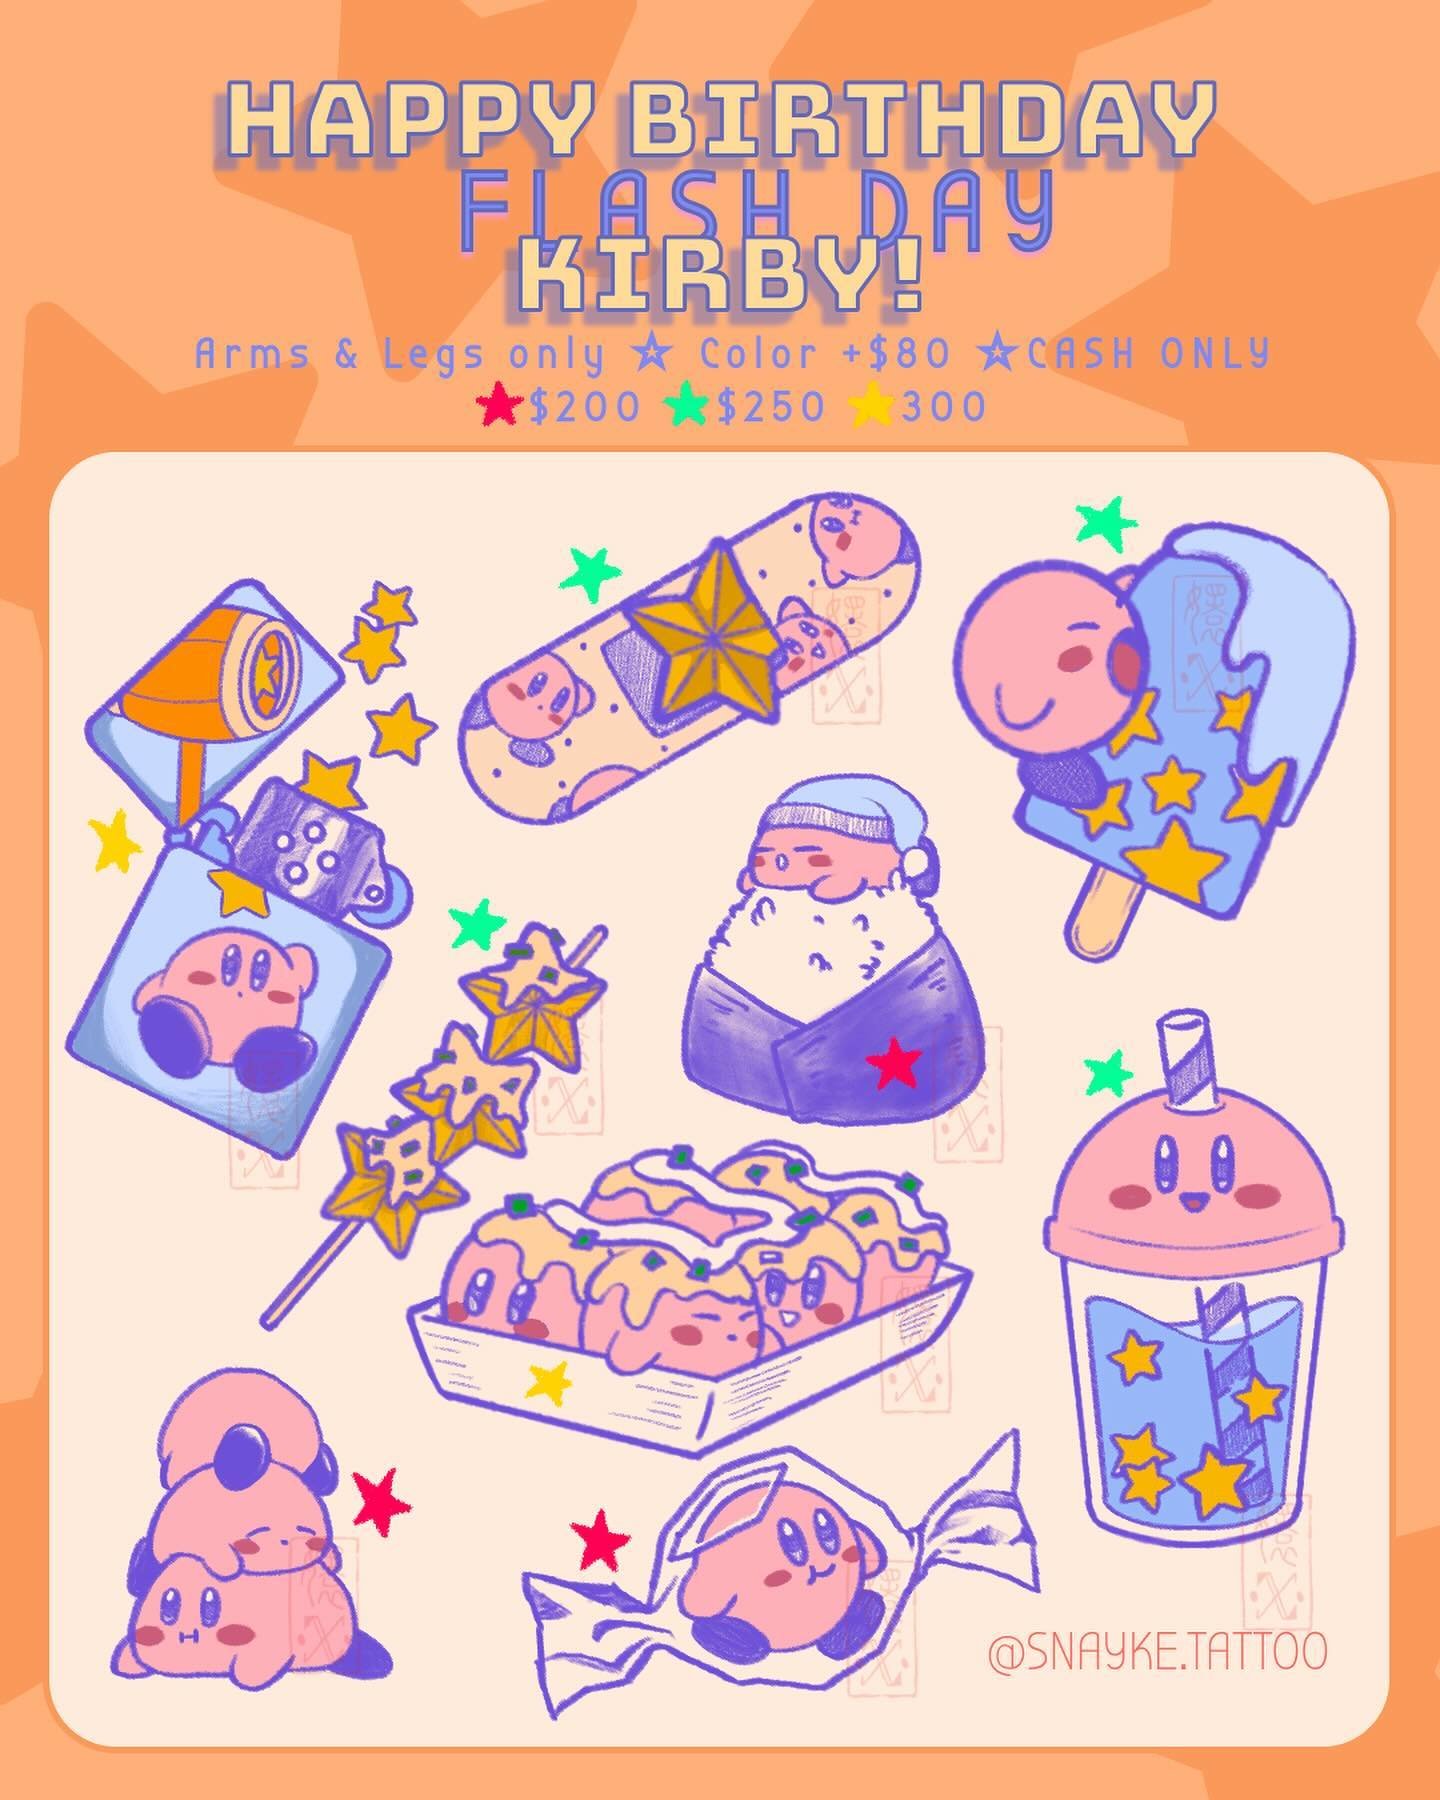 Kirby said come to birthday party or else 🔪 

FLASH DROP for SATURDAY, APRIL 27th 

✧ Walk-in first come first serve ✧
✧ Black and grey shaded OR color ✧
✧ ARMS AND LEGS ONLY (even tho Kirby has neither) 
✧ Cash only ✧
✧ If you cannot make the event